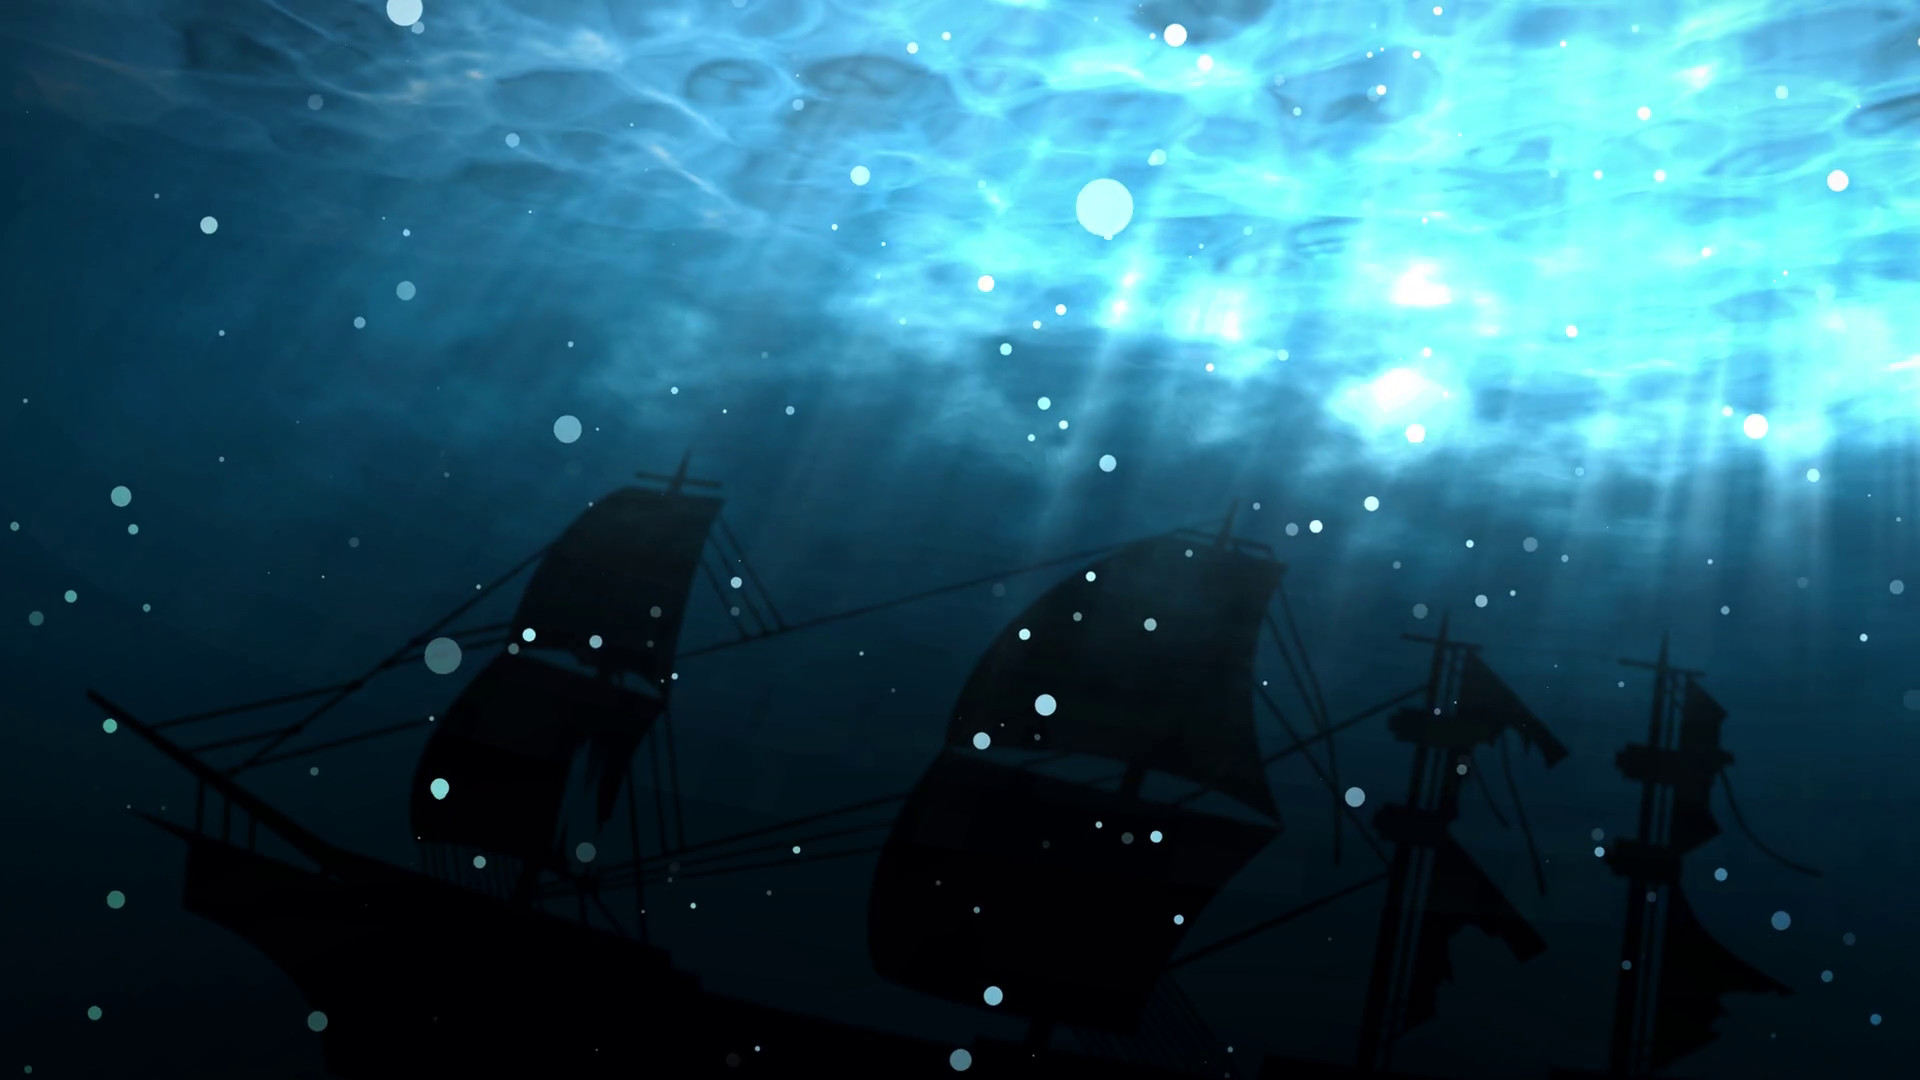 1920x1080 Seamless animation of deep blue ocean with shipwreck background. Ship sunk  in undersea water as a silhouette background. With bubbles and light  shinning ...